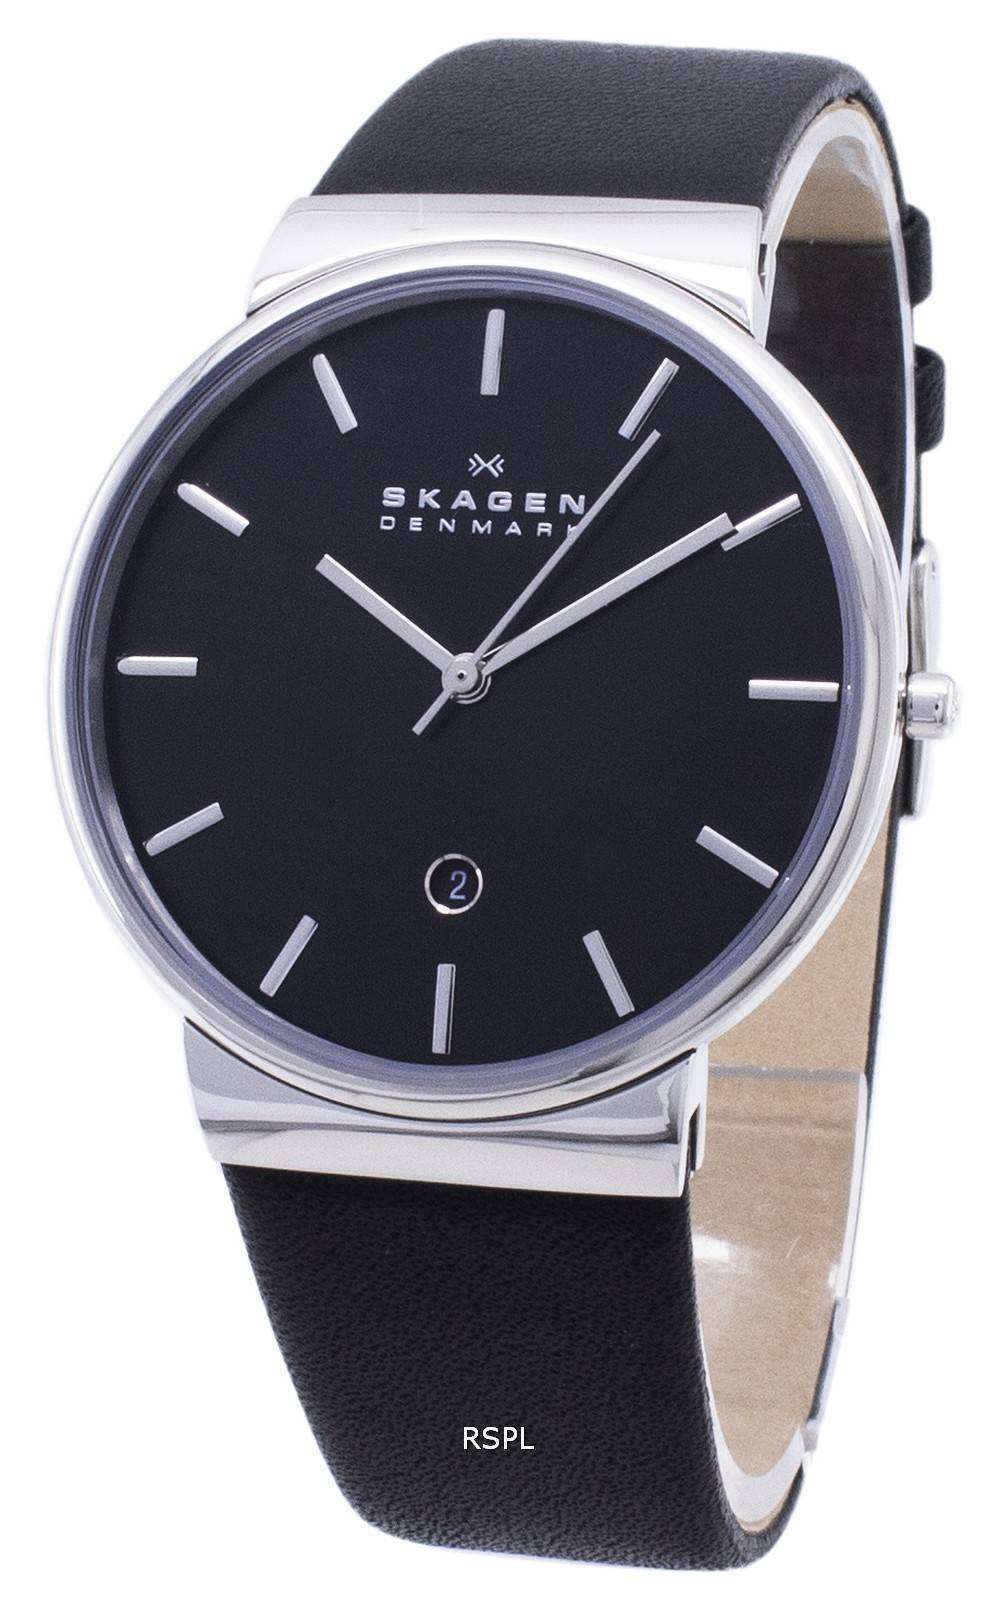 Are These Watches A Scandinavian Scam? - Skagen Watch Review ('Ancher'  SKW6082) - YouTube